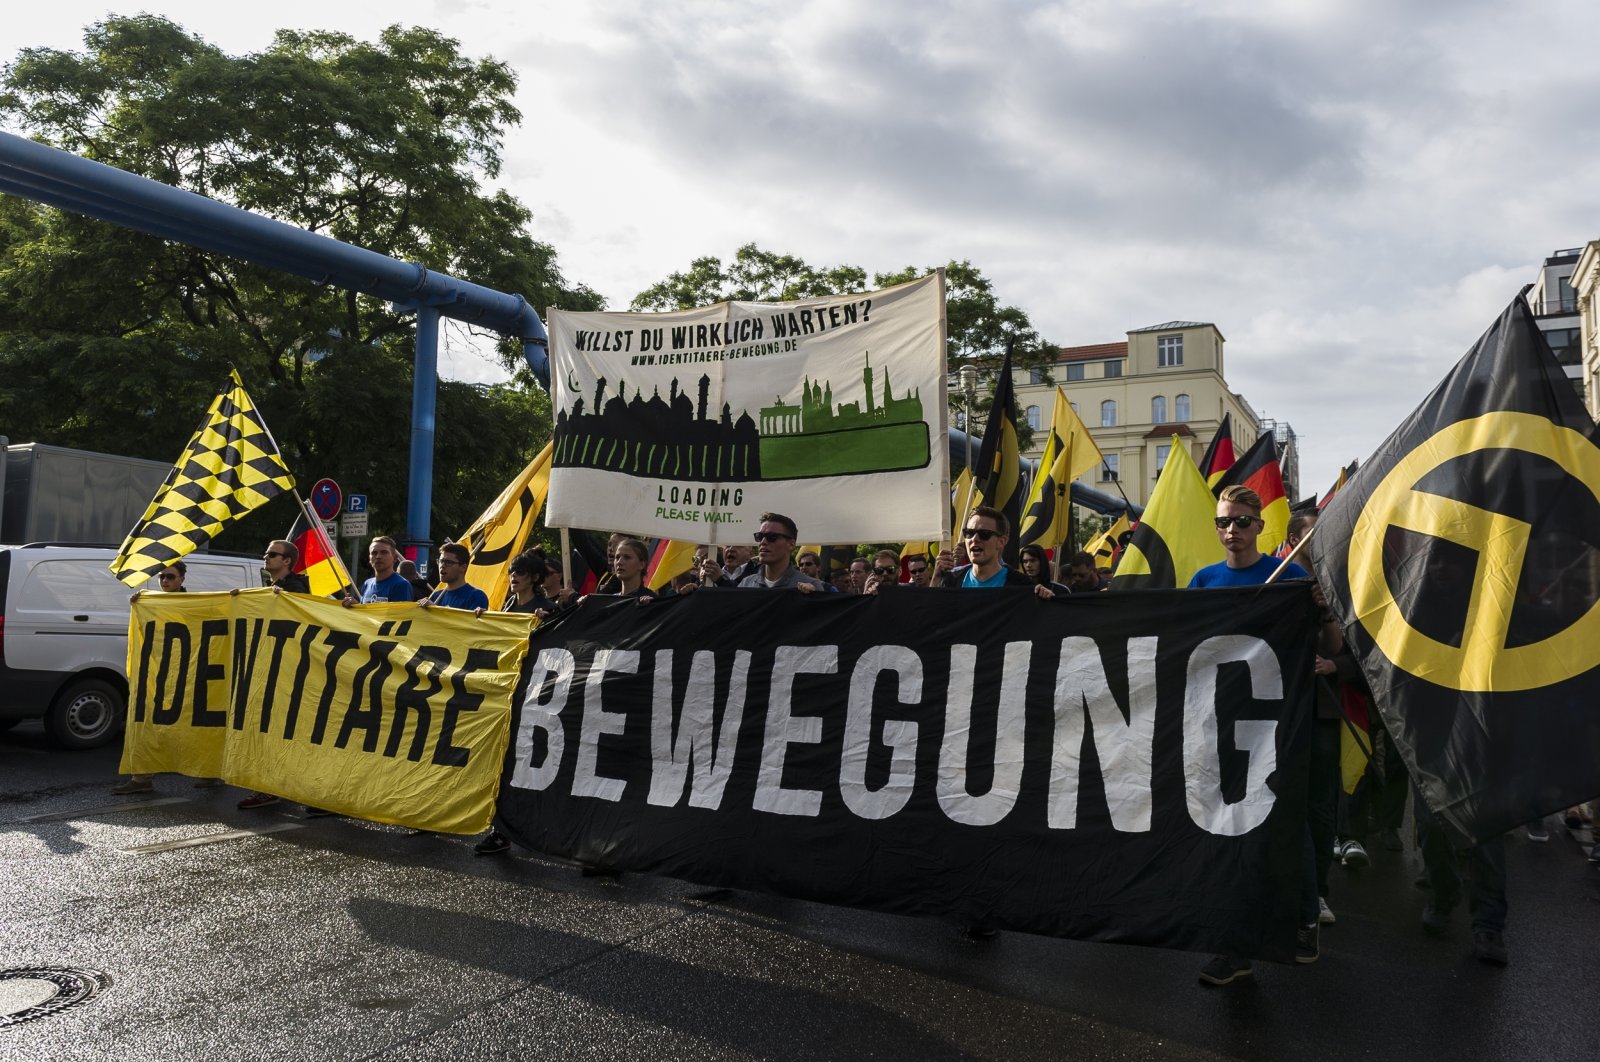 Protesters from the far-right movement Generation Identitaire take part in a demonstration against migrants, Berlin, Germany, June 17, 2016. (Getty Photo)